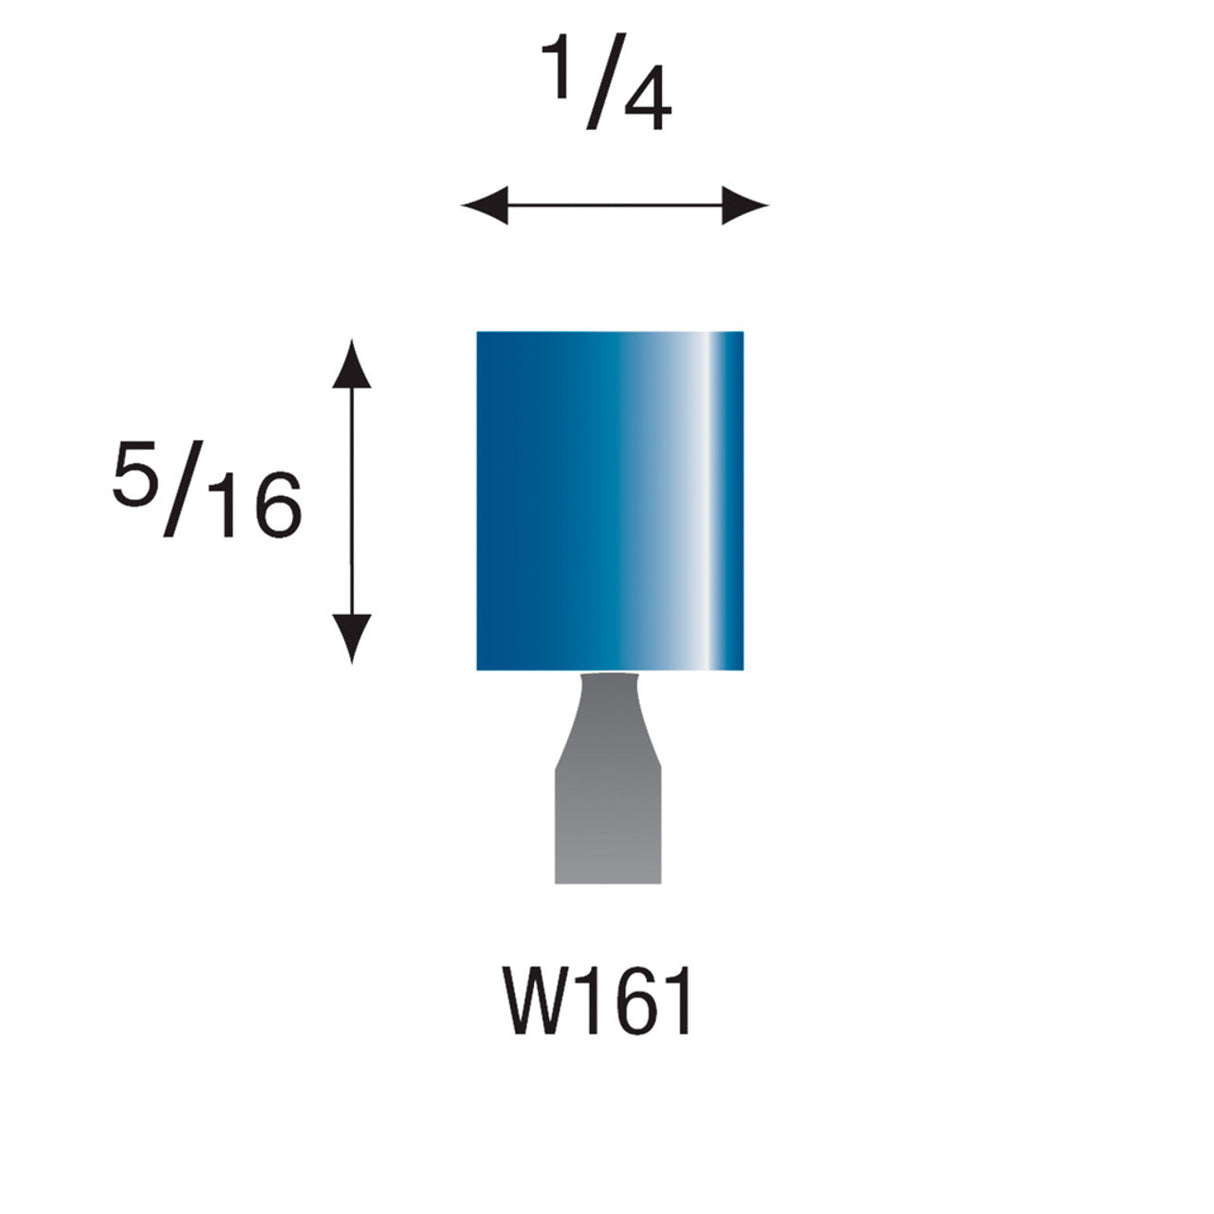 Blue Mounted Stones - "W" Style 1/8" Shank (Pkg. of 24)